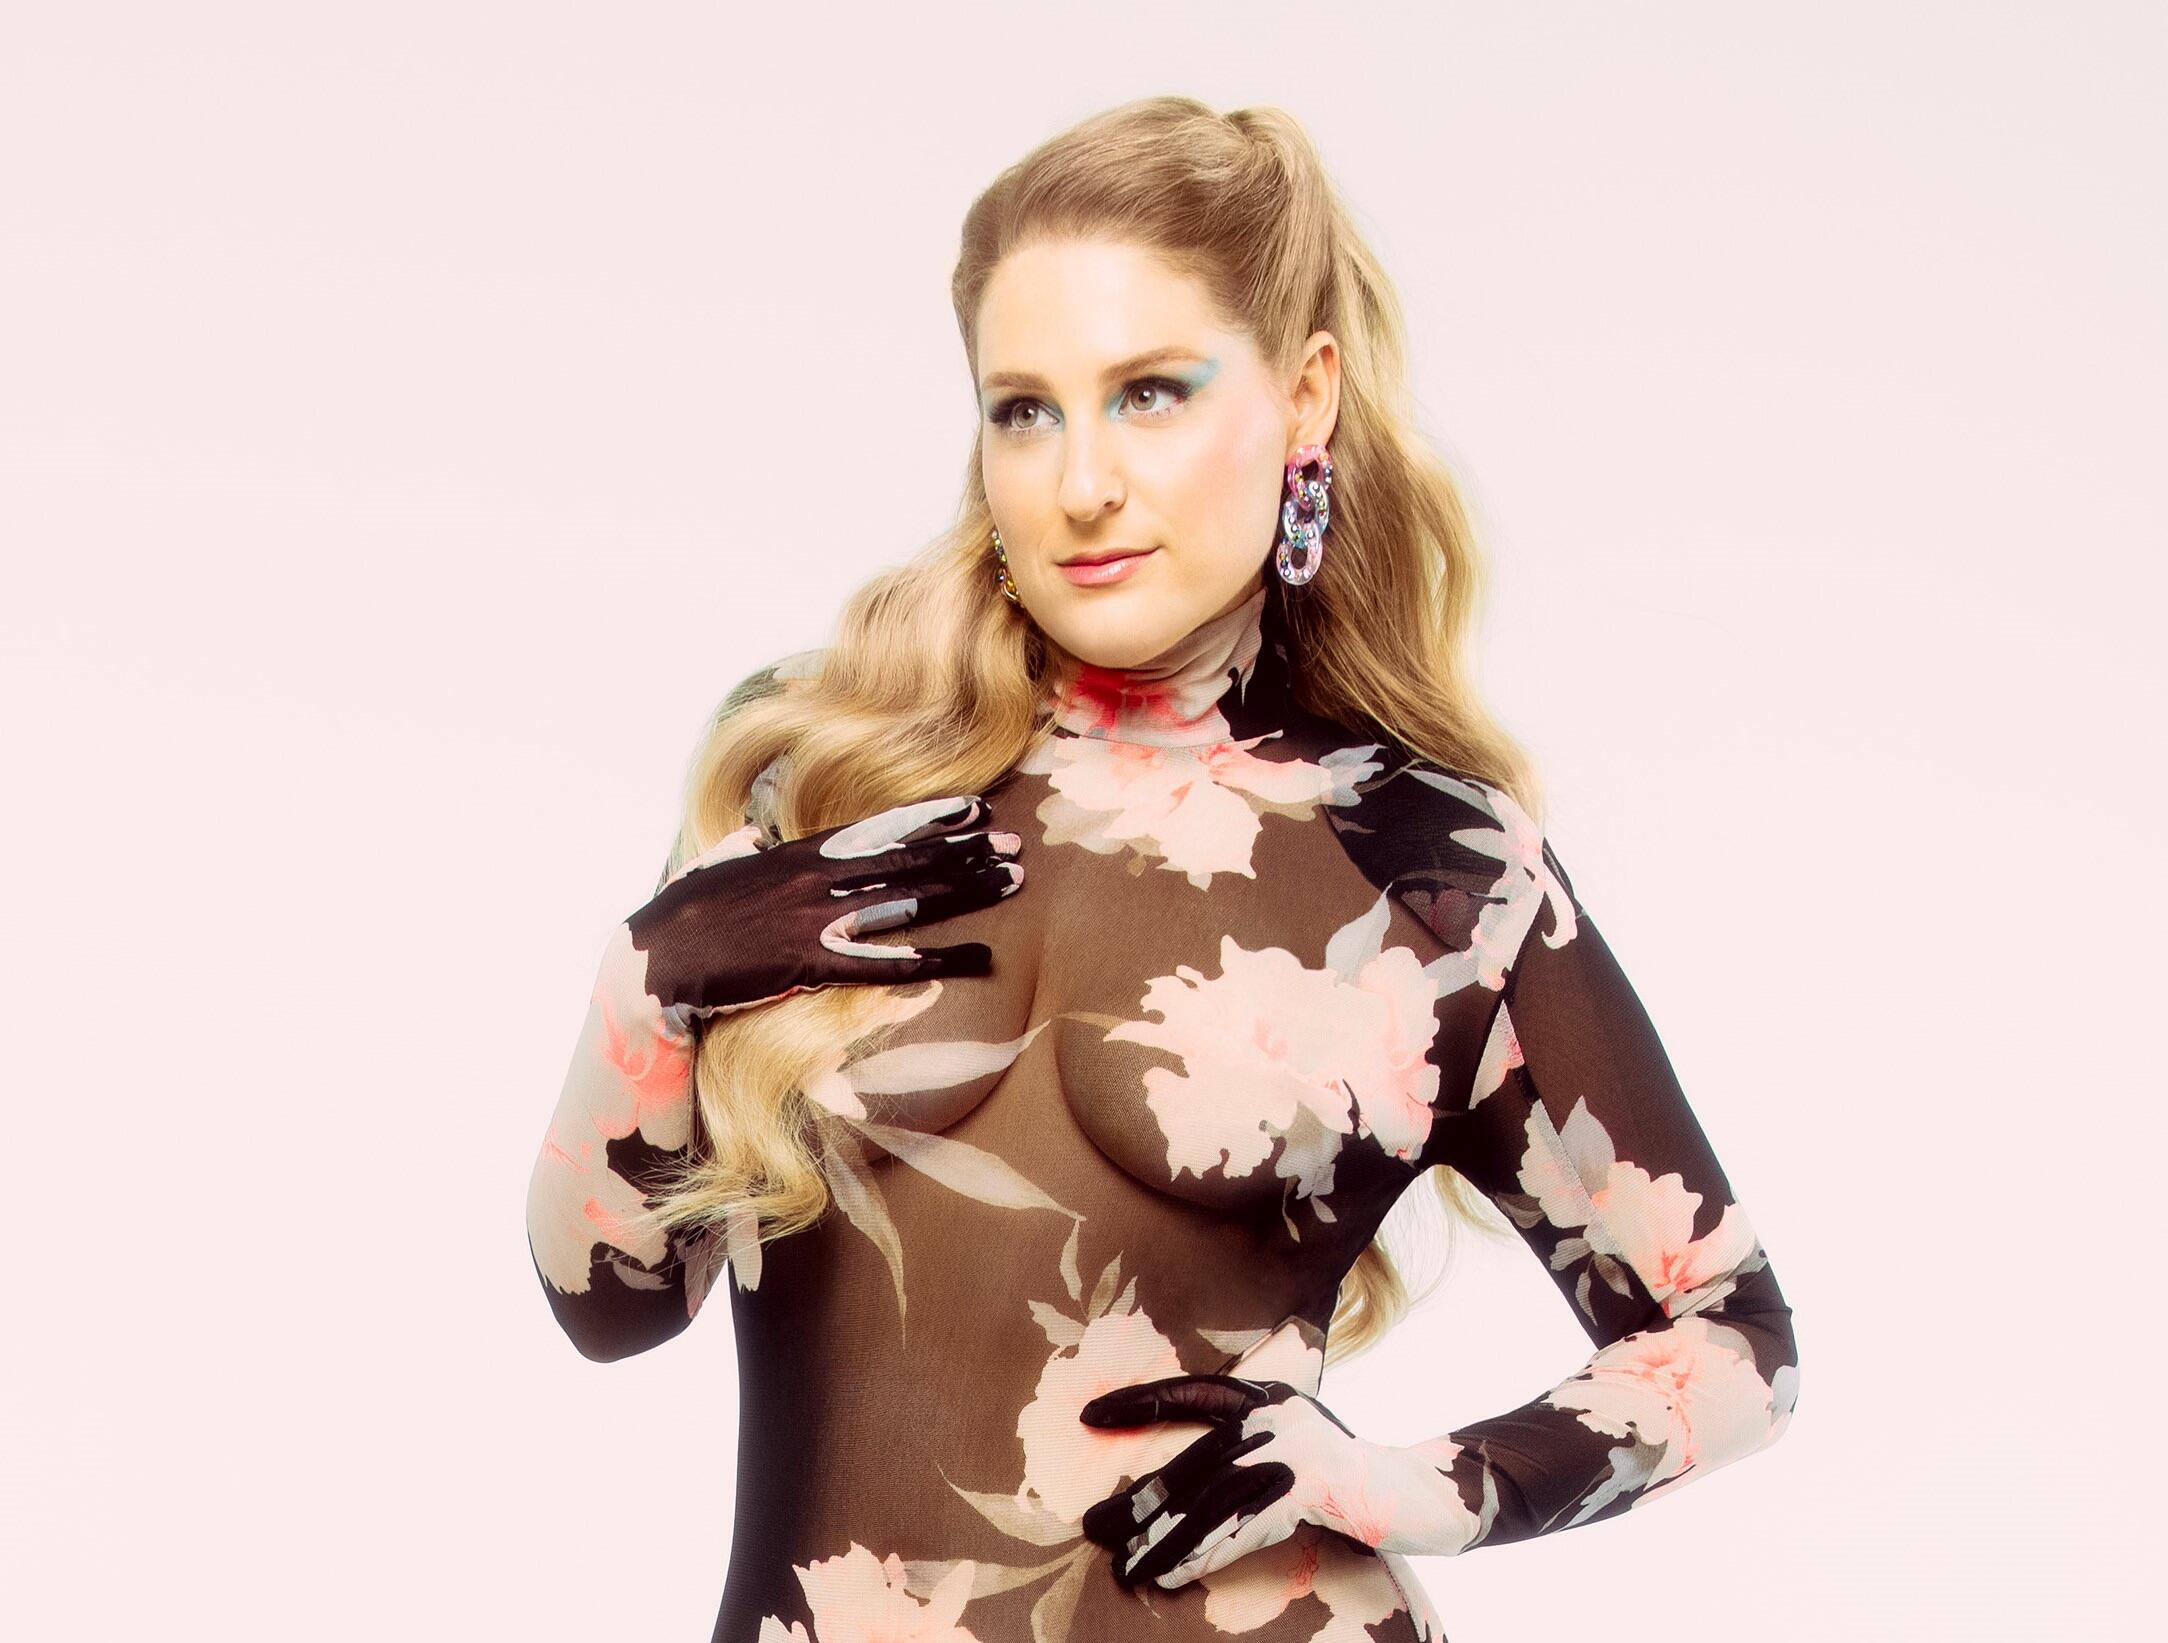 Pop Crave on X: Meghan Trainor's Made You Look wins the award